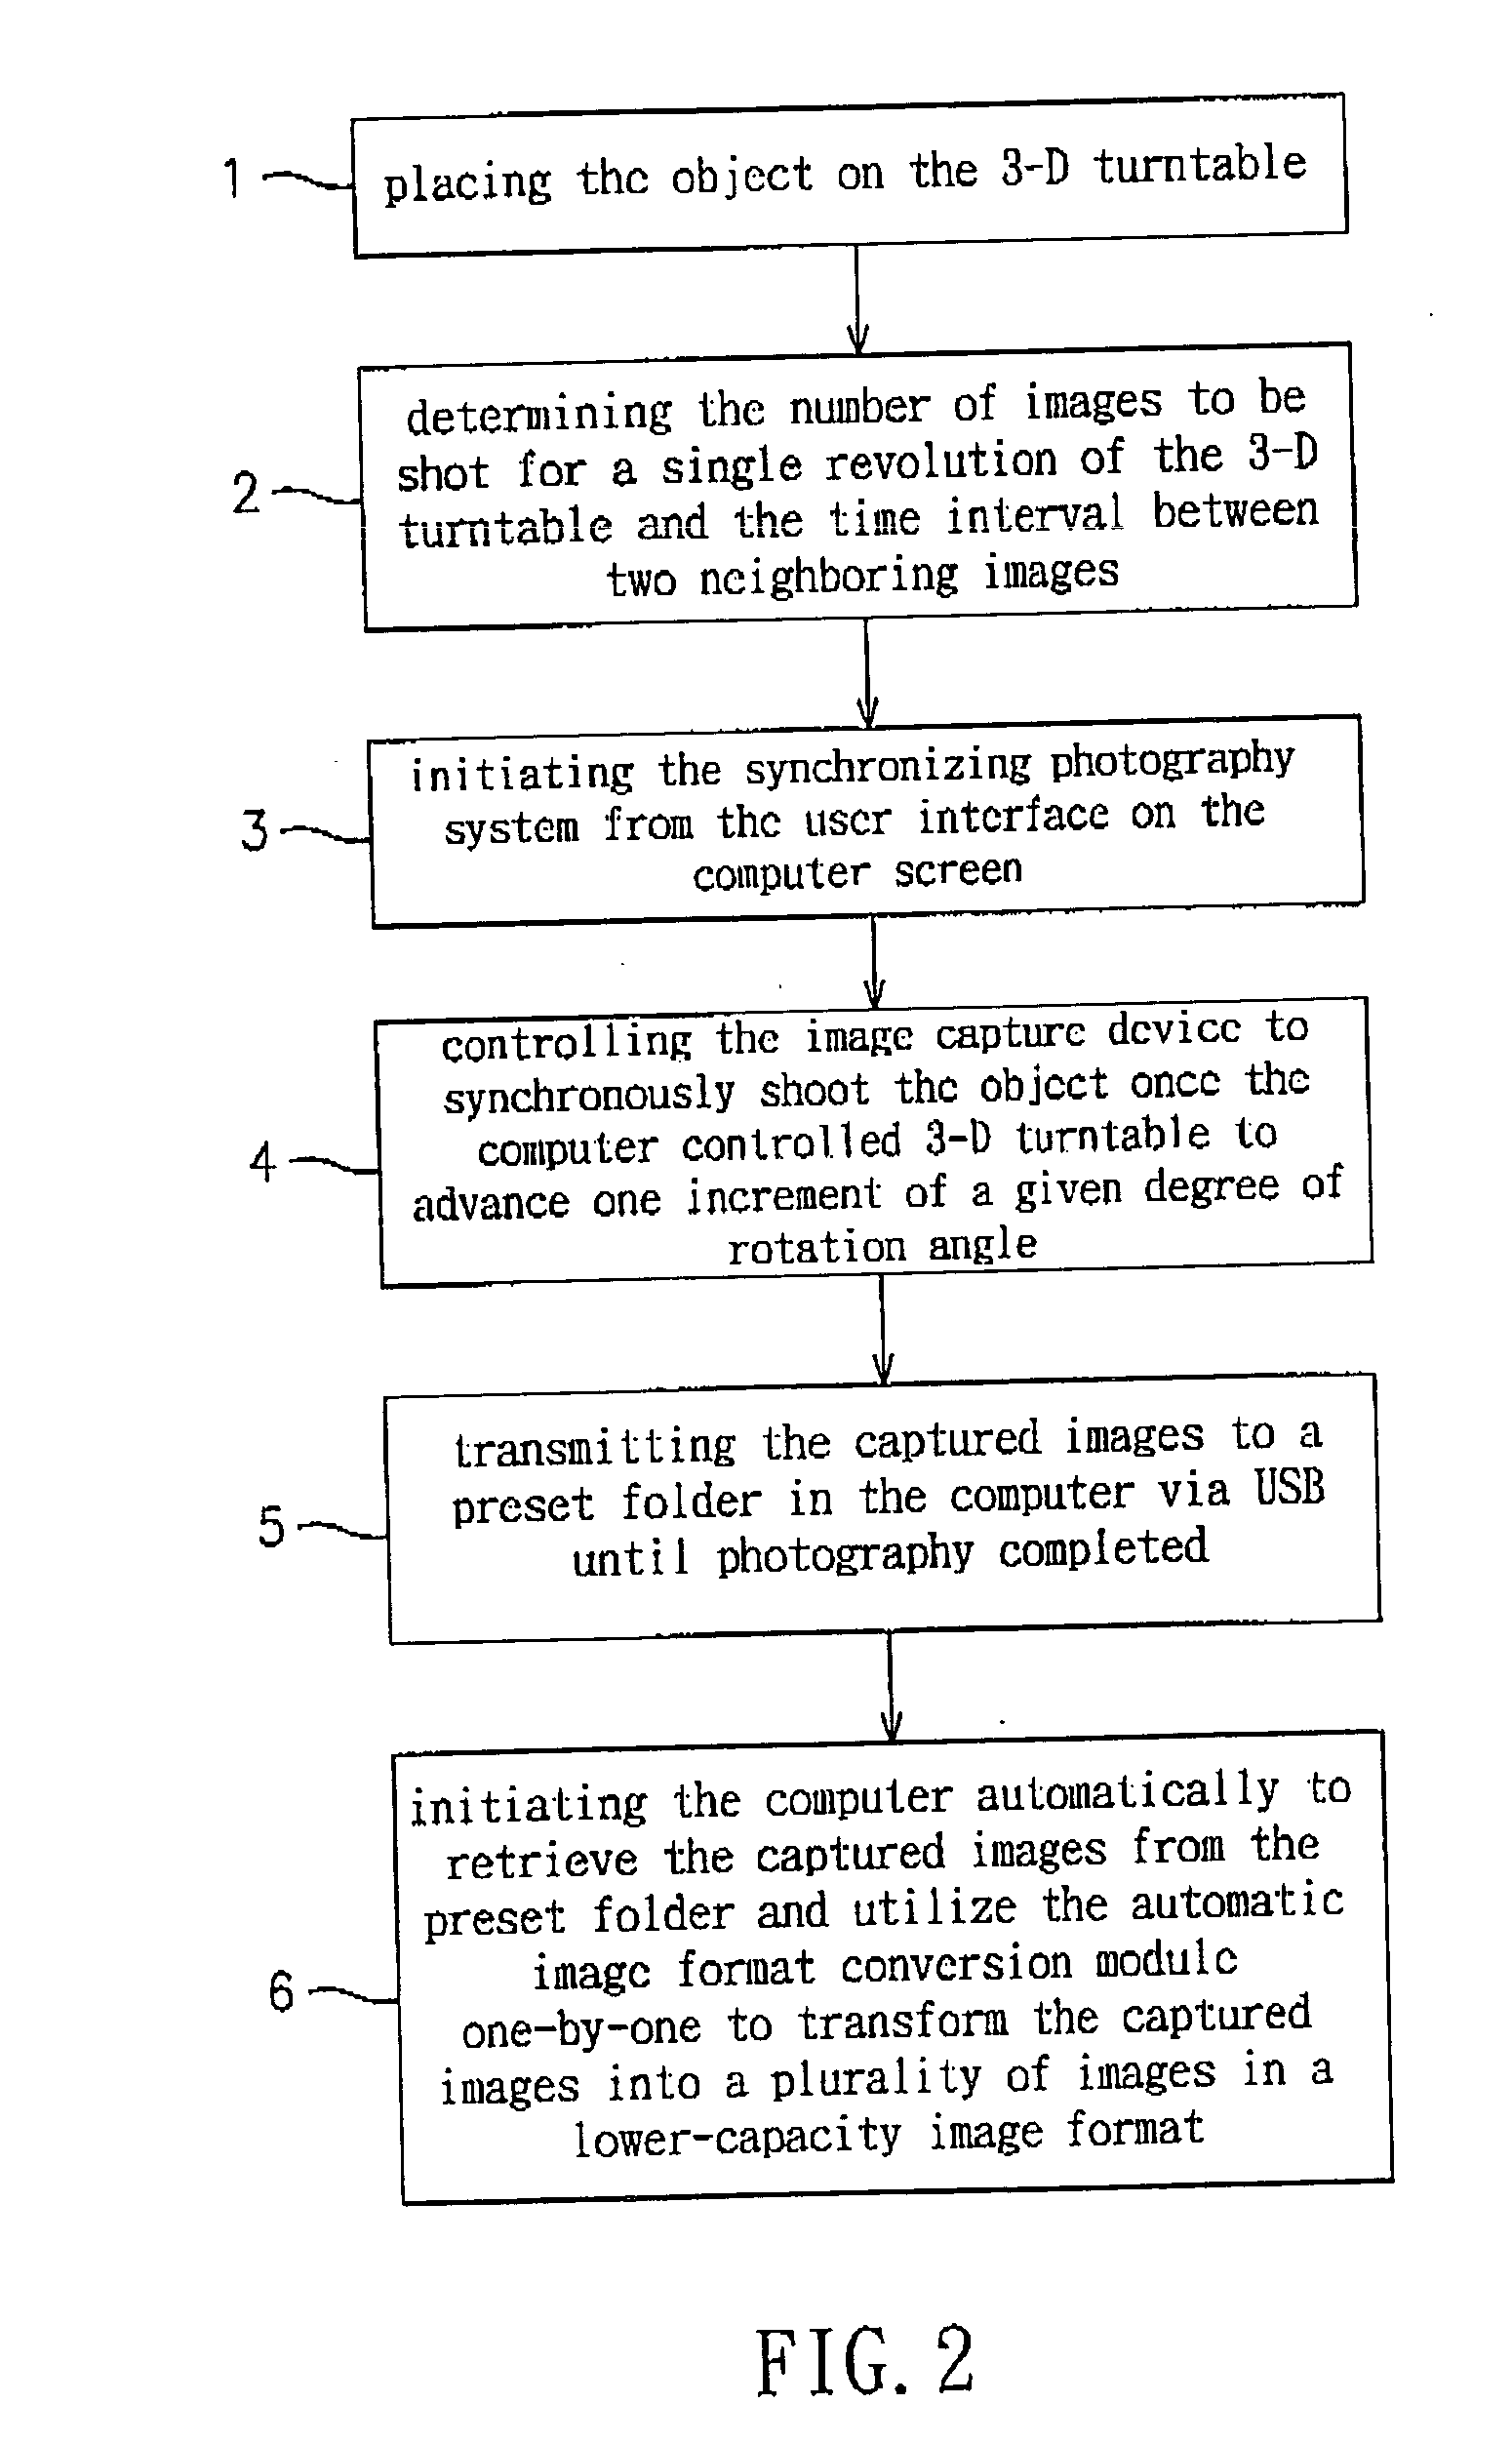 Computer controlled system for synchronizing photography implementation between a 3-D turntable and an image capture device with automatic image format conversion